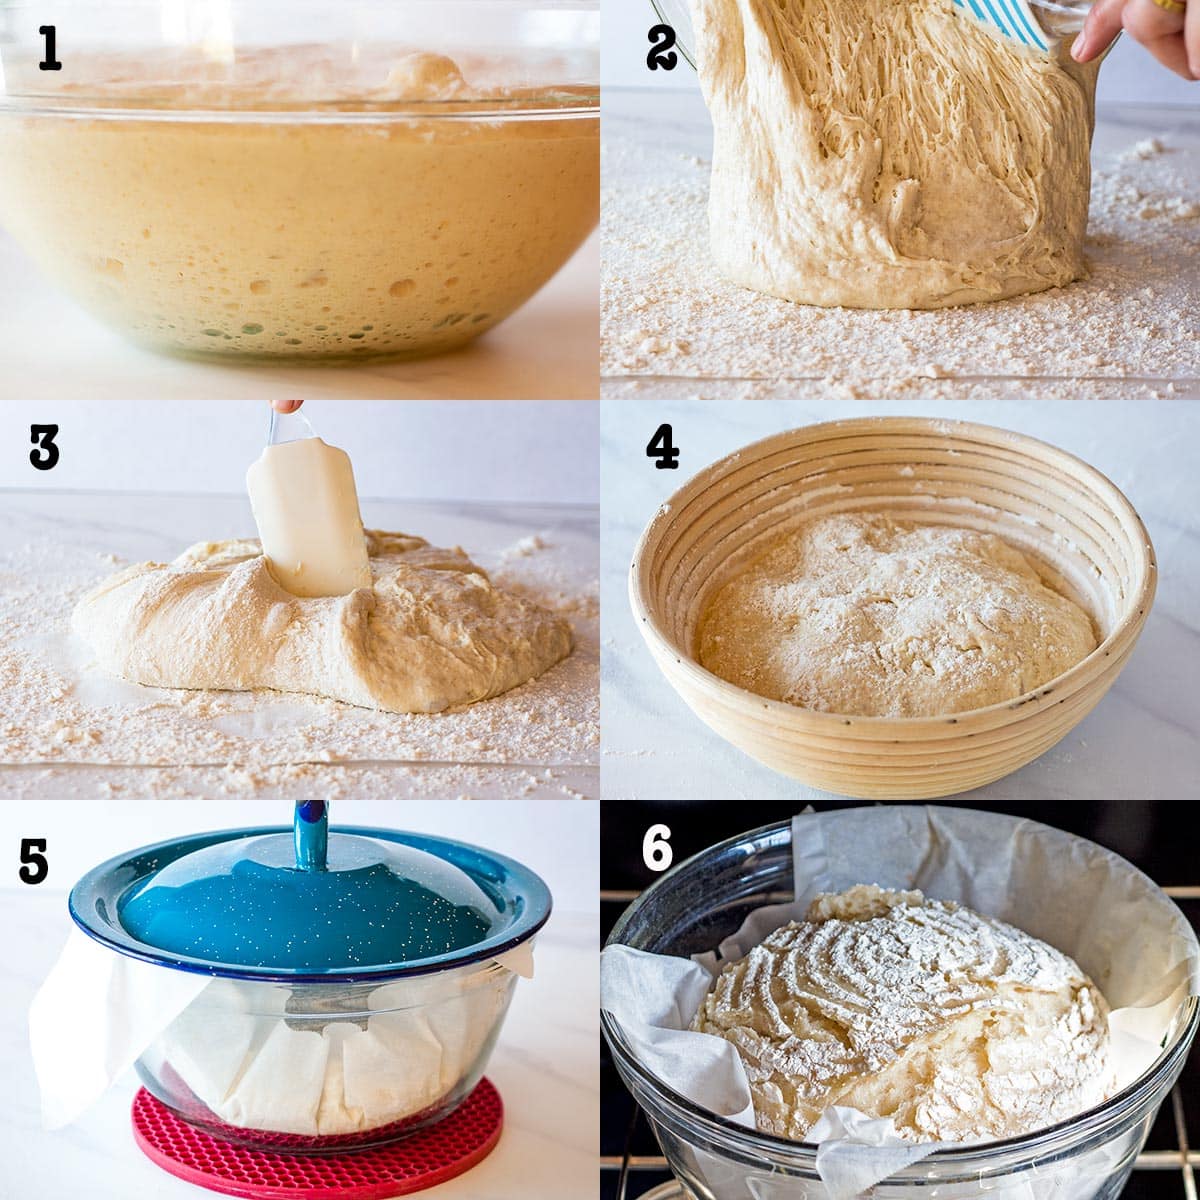 How to make a sourdough bread in 6 steps